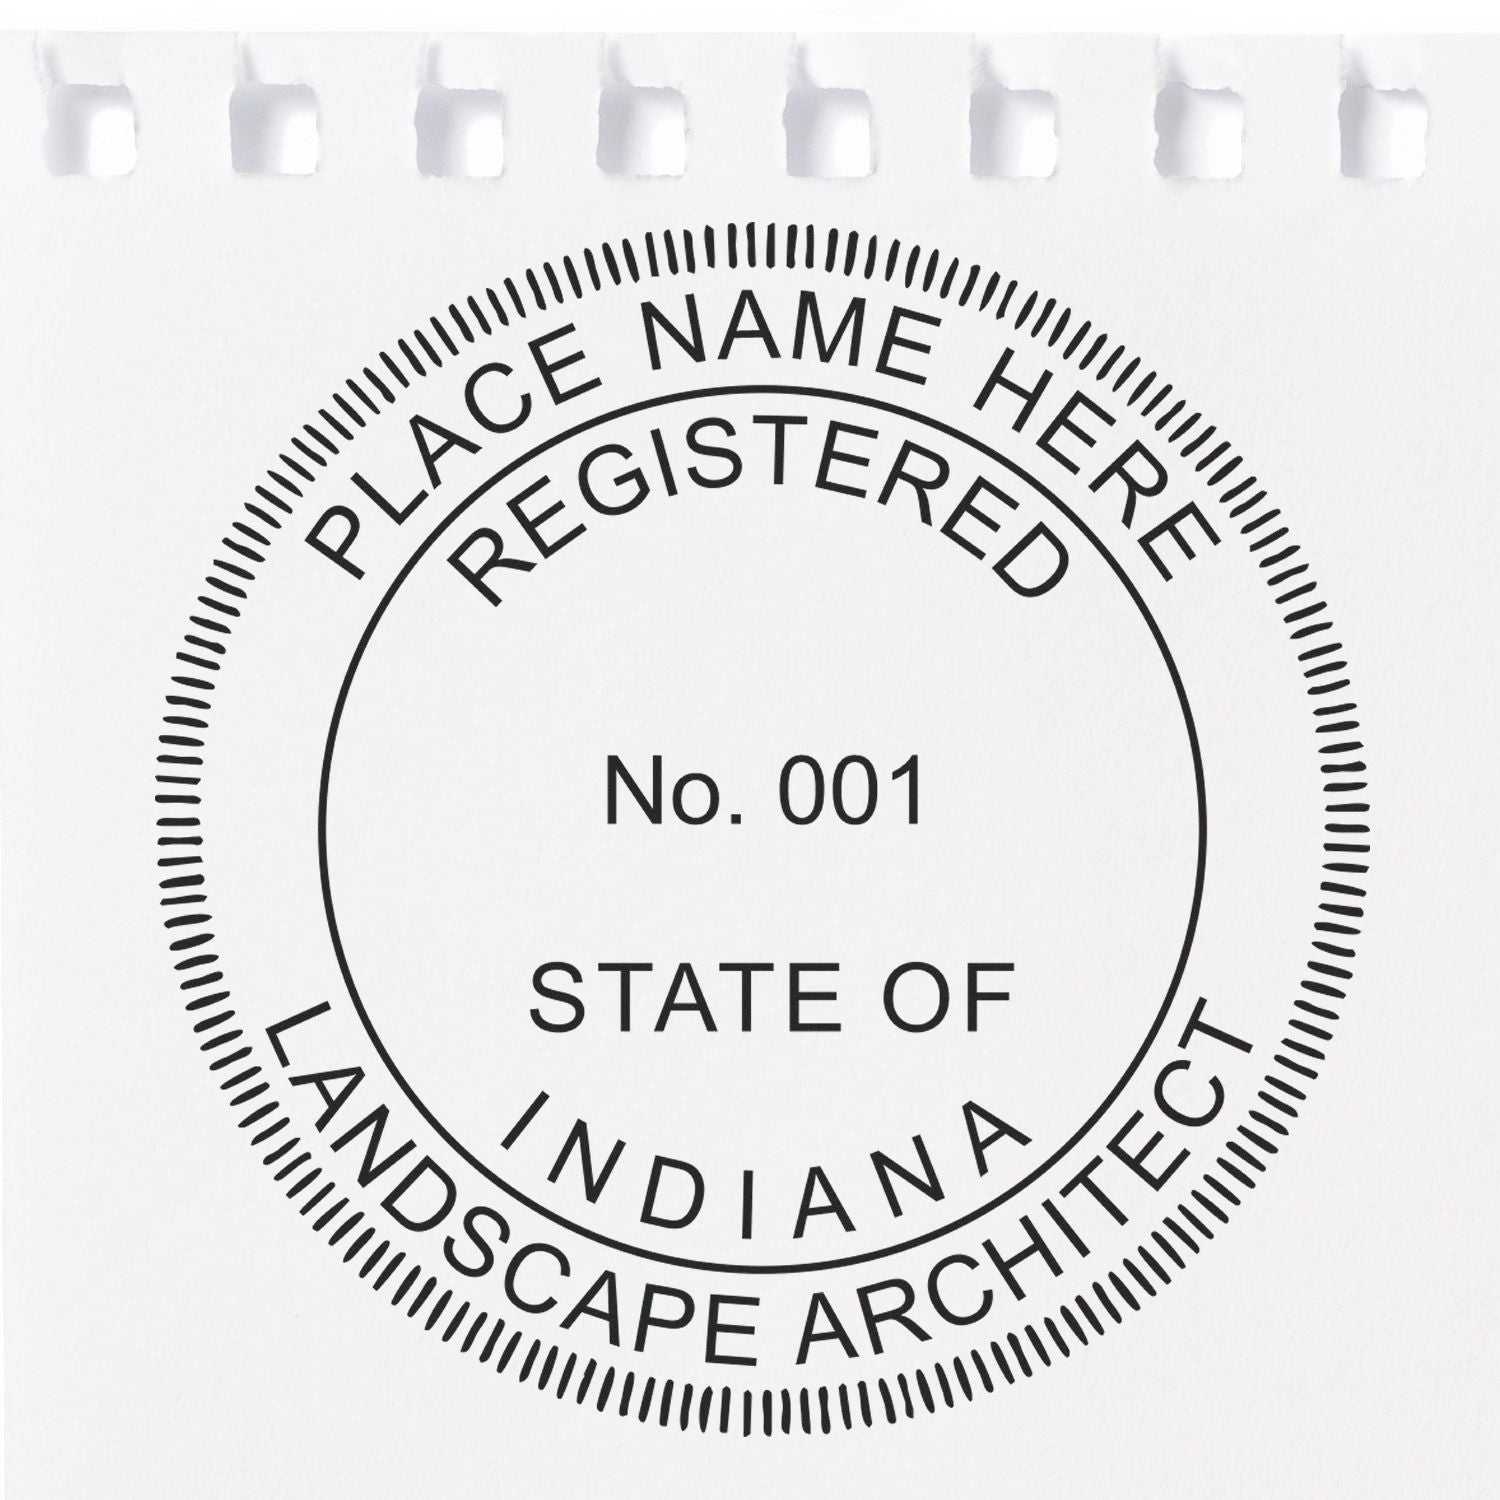 This paper is stamped with a sample imprint of the Premium MaxLight Pre-Inked Indiana Landscape Architectural Stamp, signifying its quality and reliability.